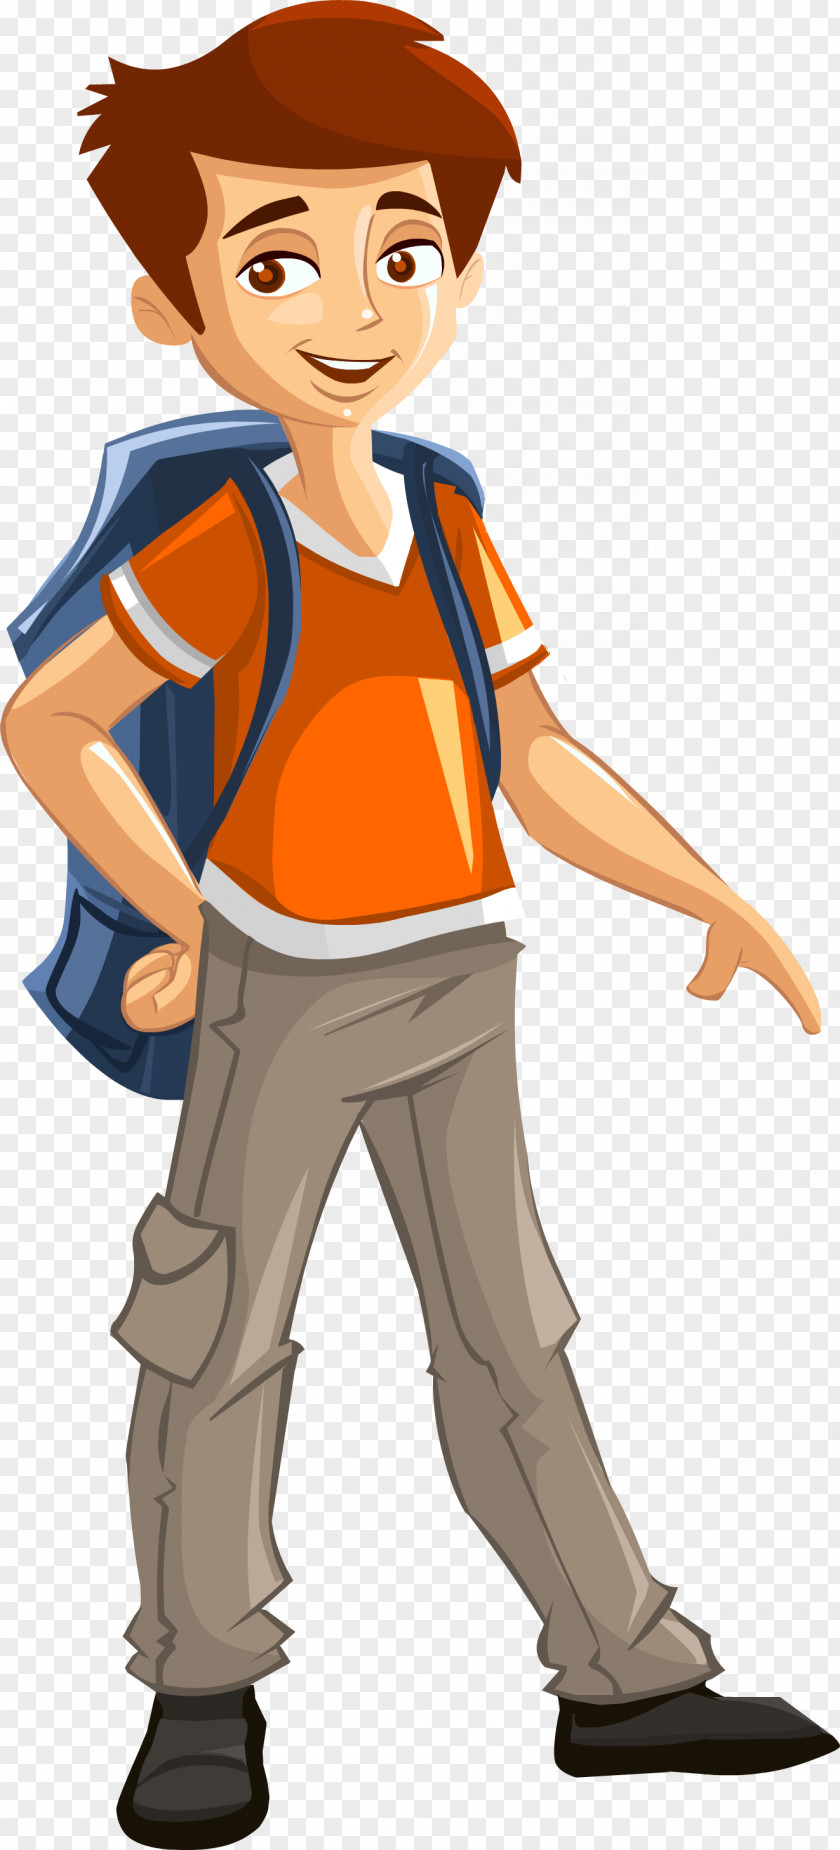 Boys Graphic Design Character Cartoon PNG